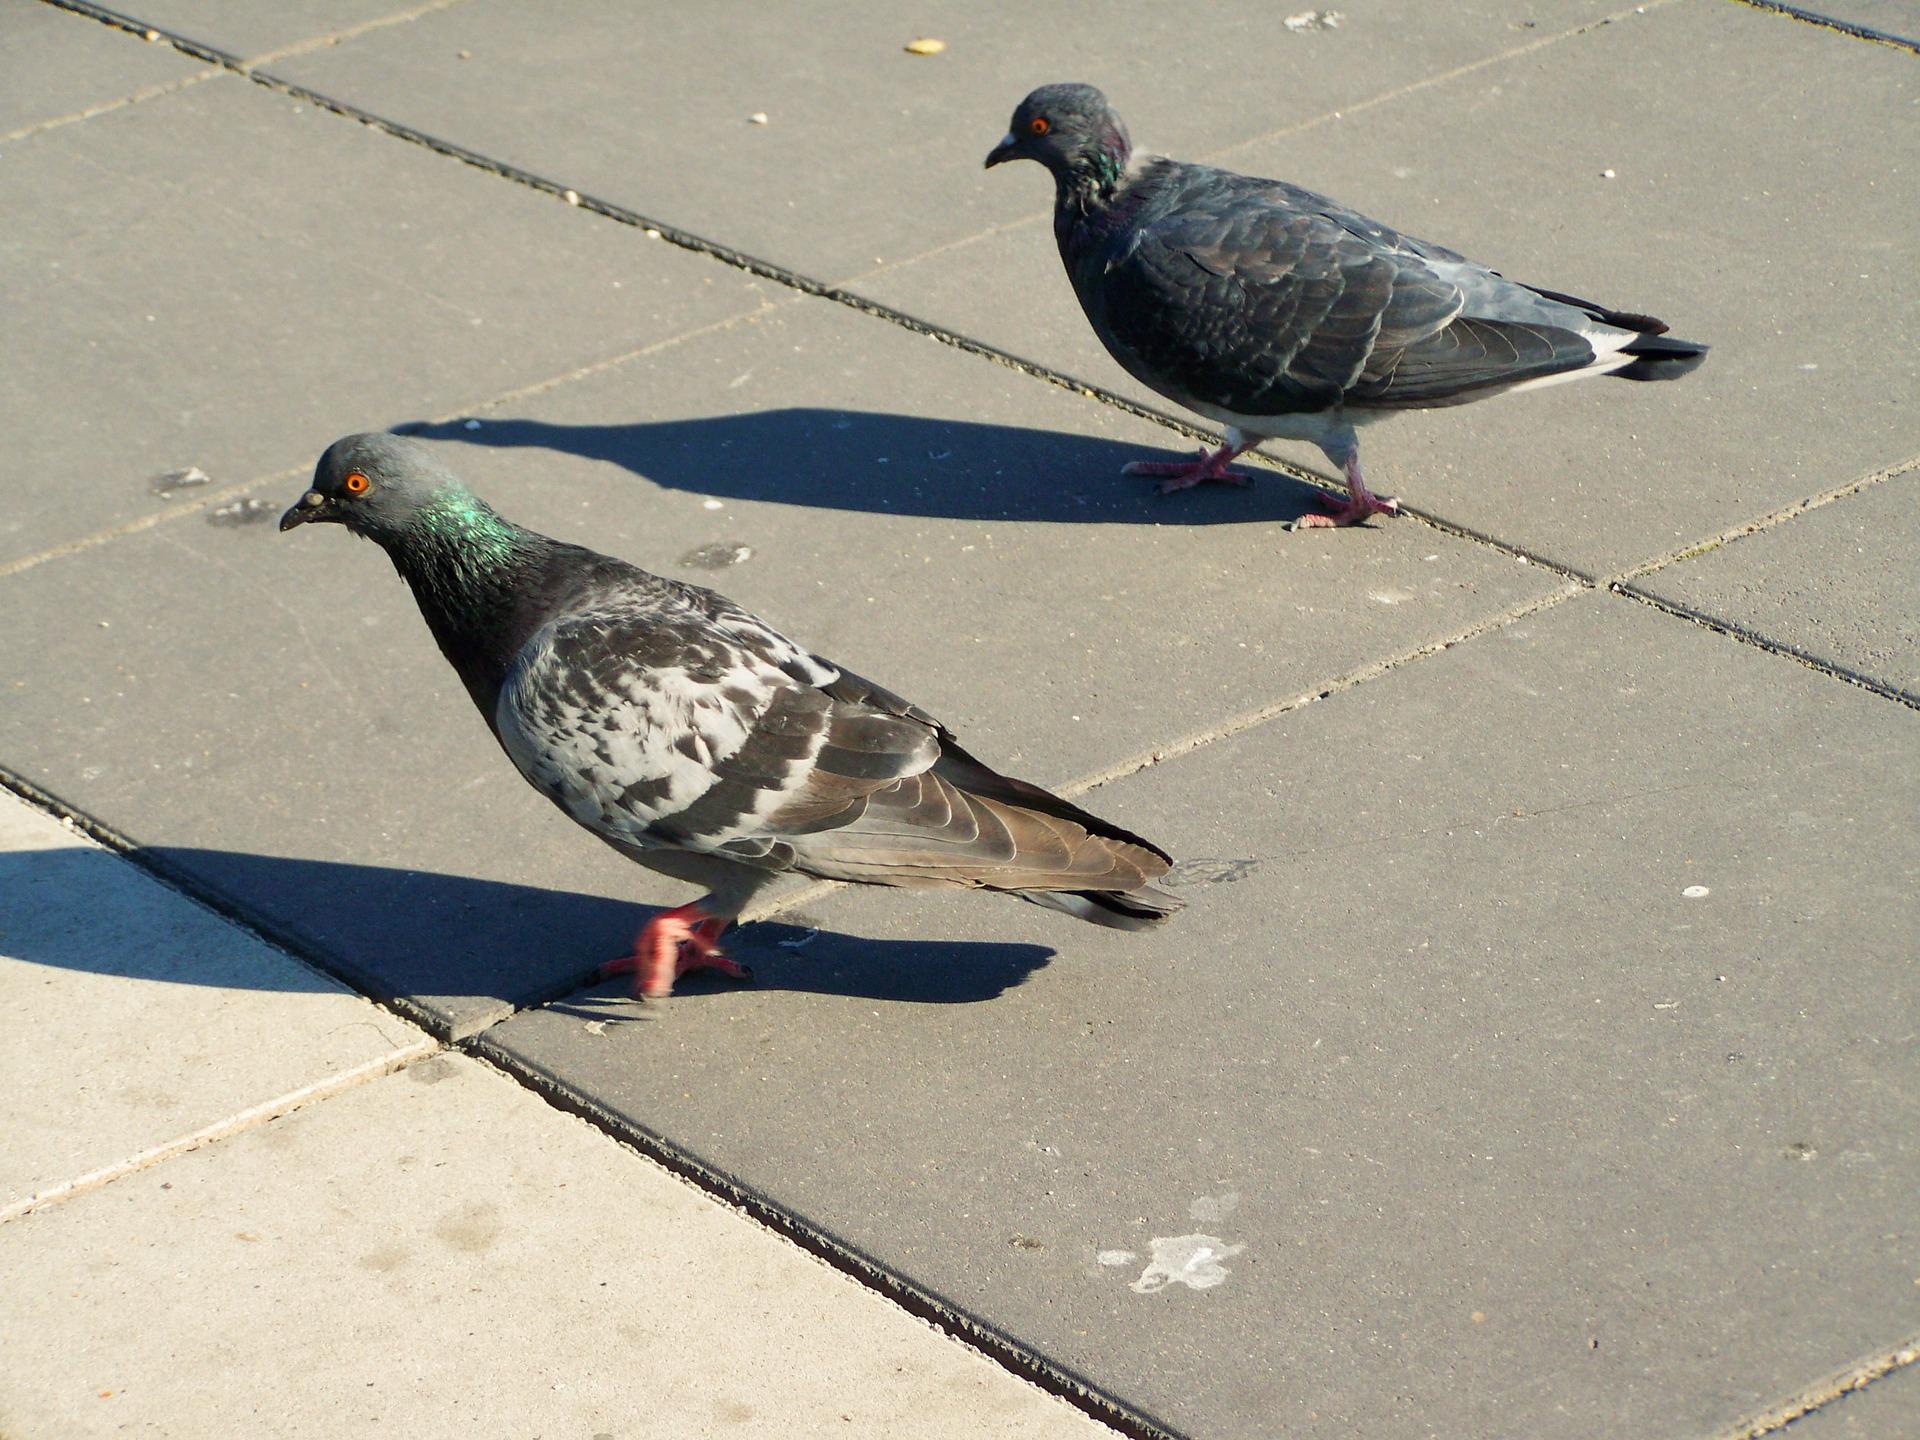 How to get rid of pigeons - pigeon repellent